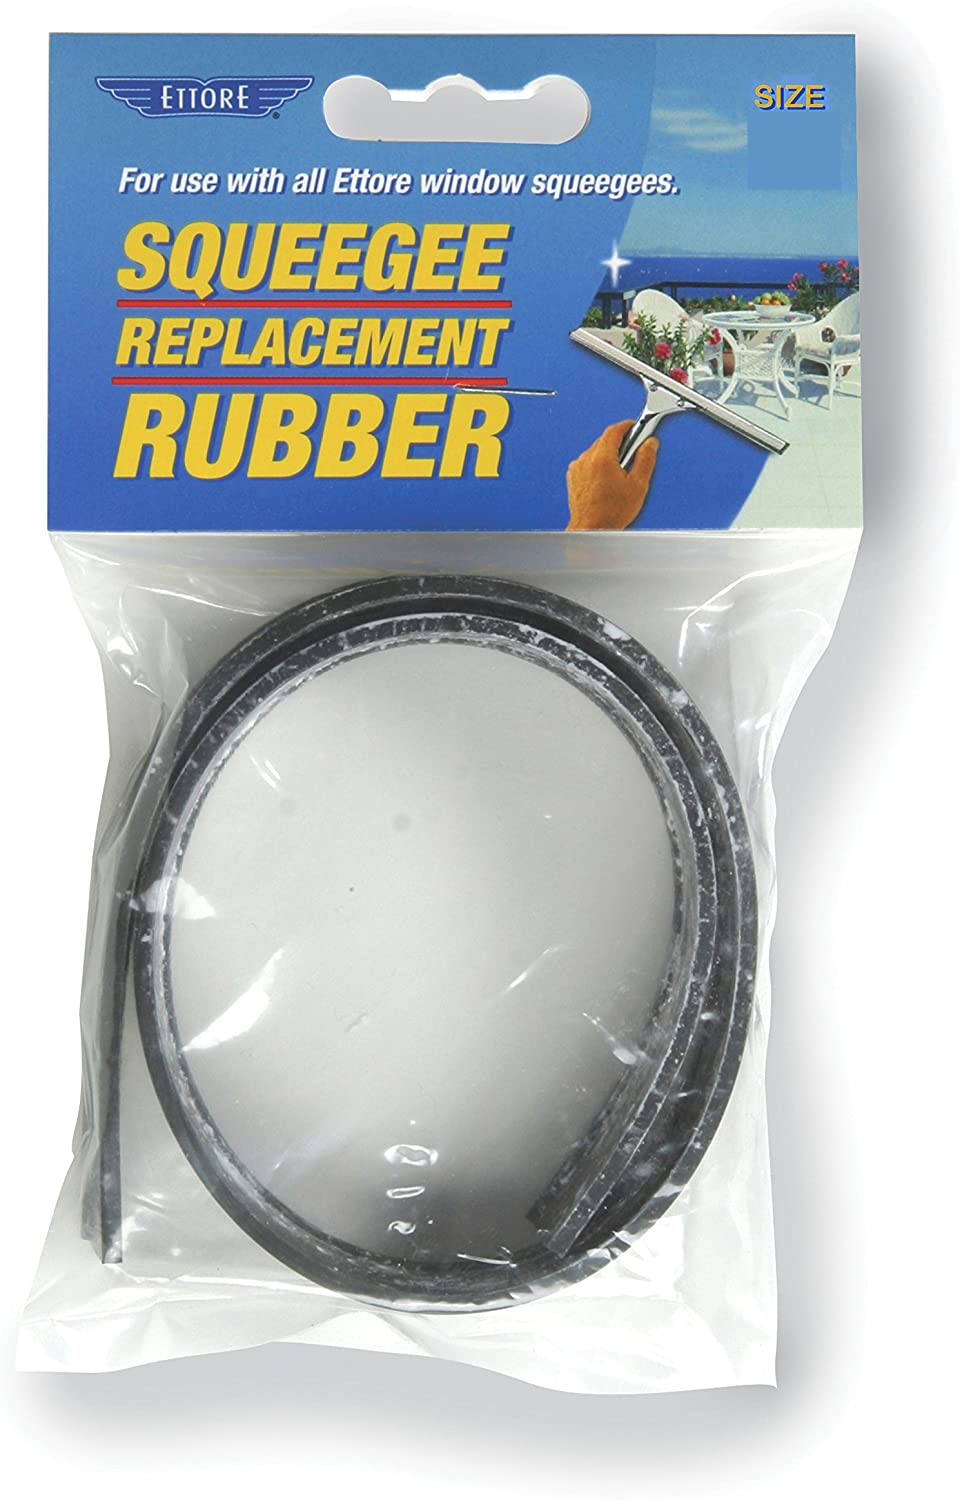 ET REPLACEMENT SQUEEGEE RUBBER 16